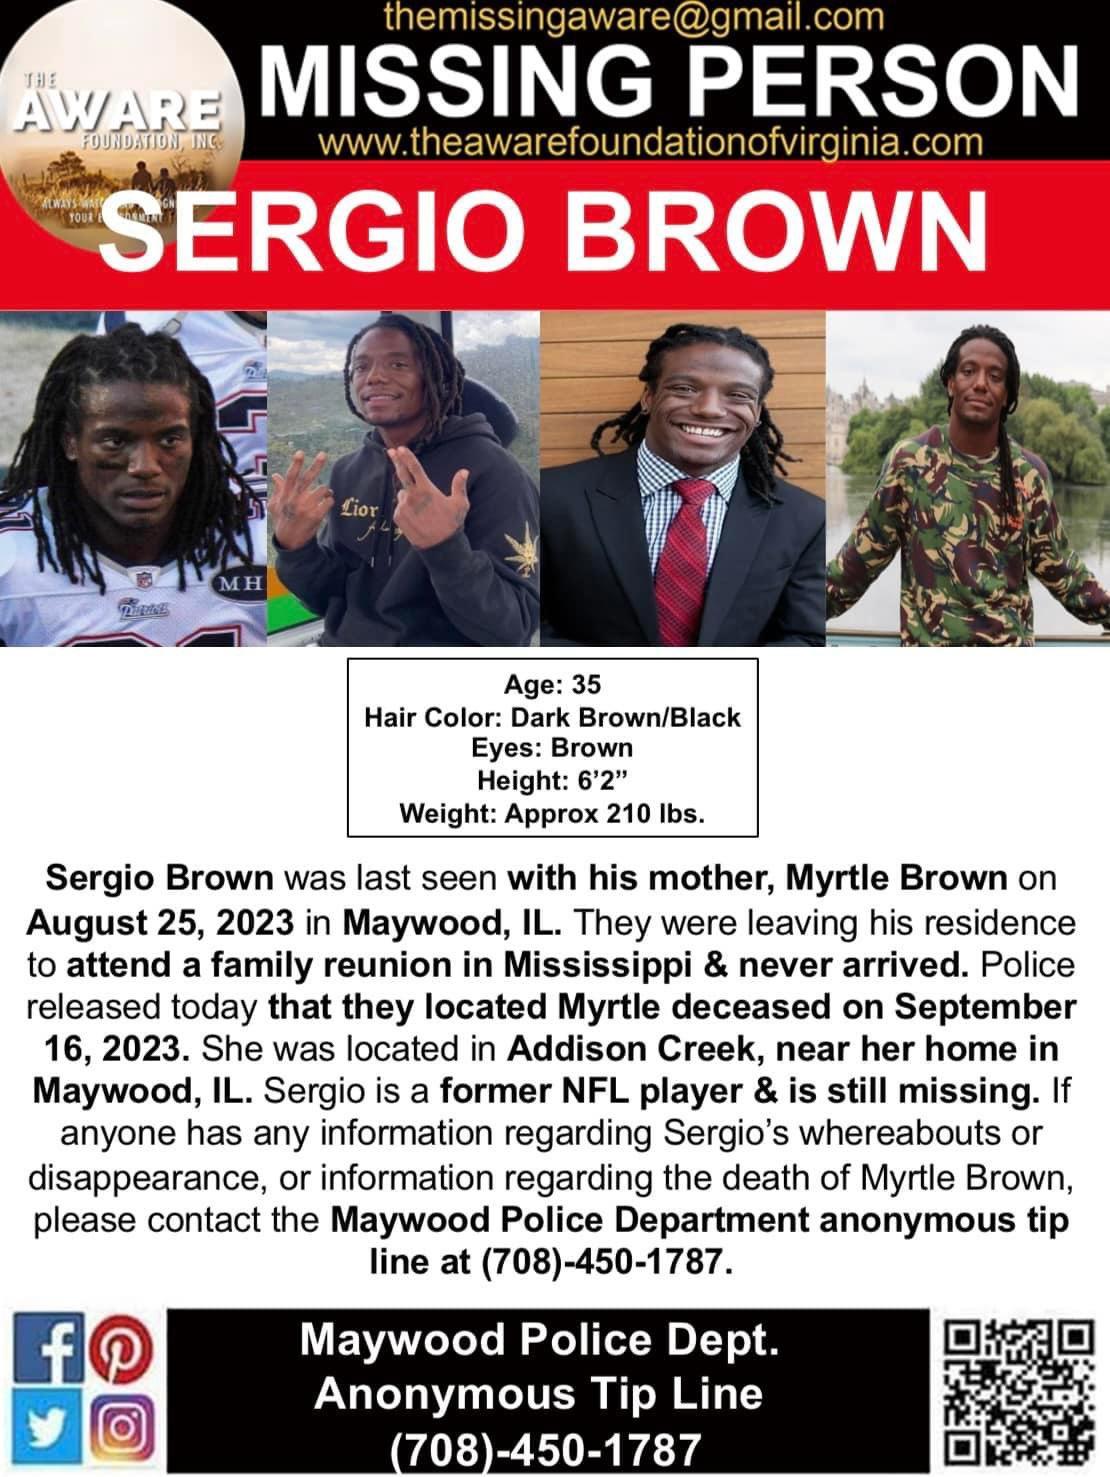 Who is former NFL player Sergio Brown and where is he now?